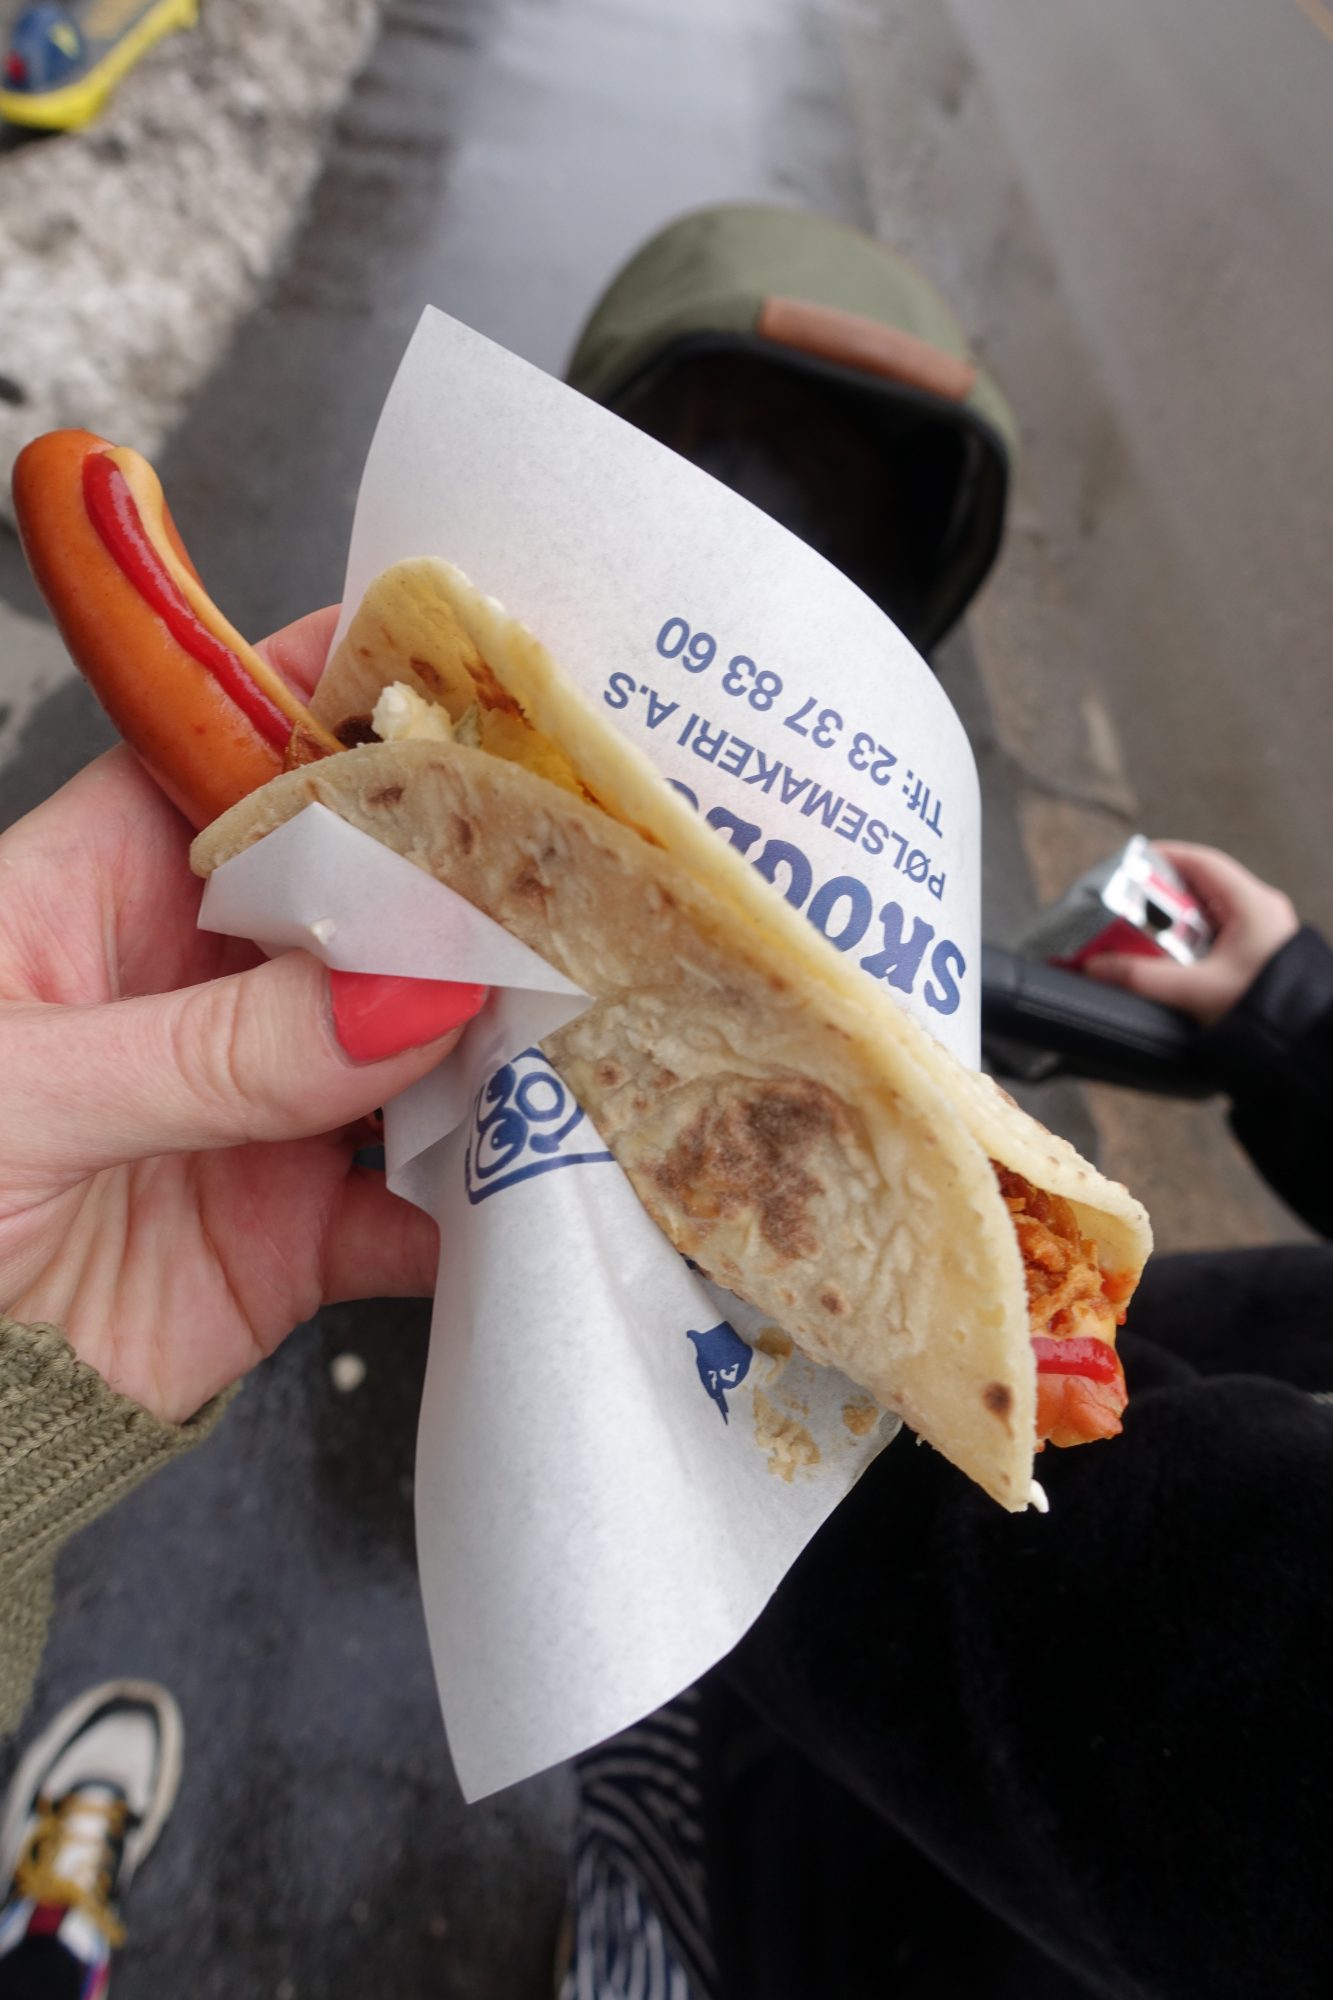 A hand holding a hot dog, covered in tomato ketchup, mustard, potato salad and dried onion - all wrapped in a lompe (norwegian potato bread)